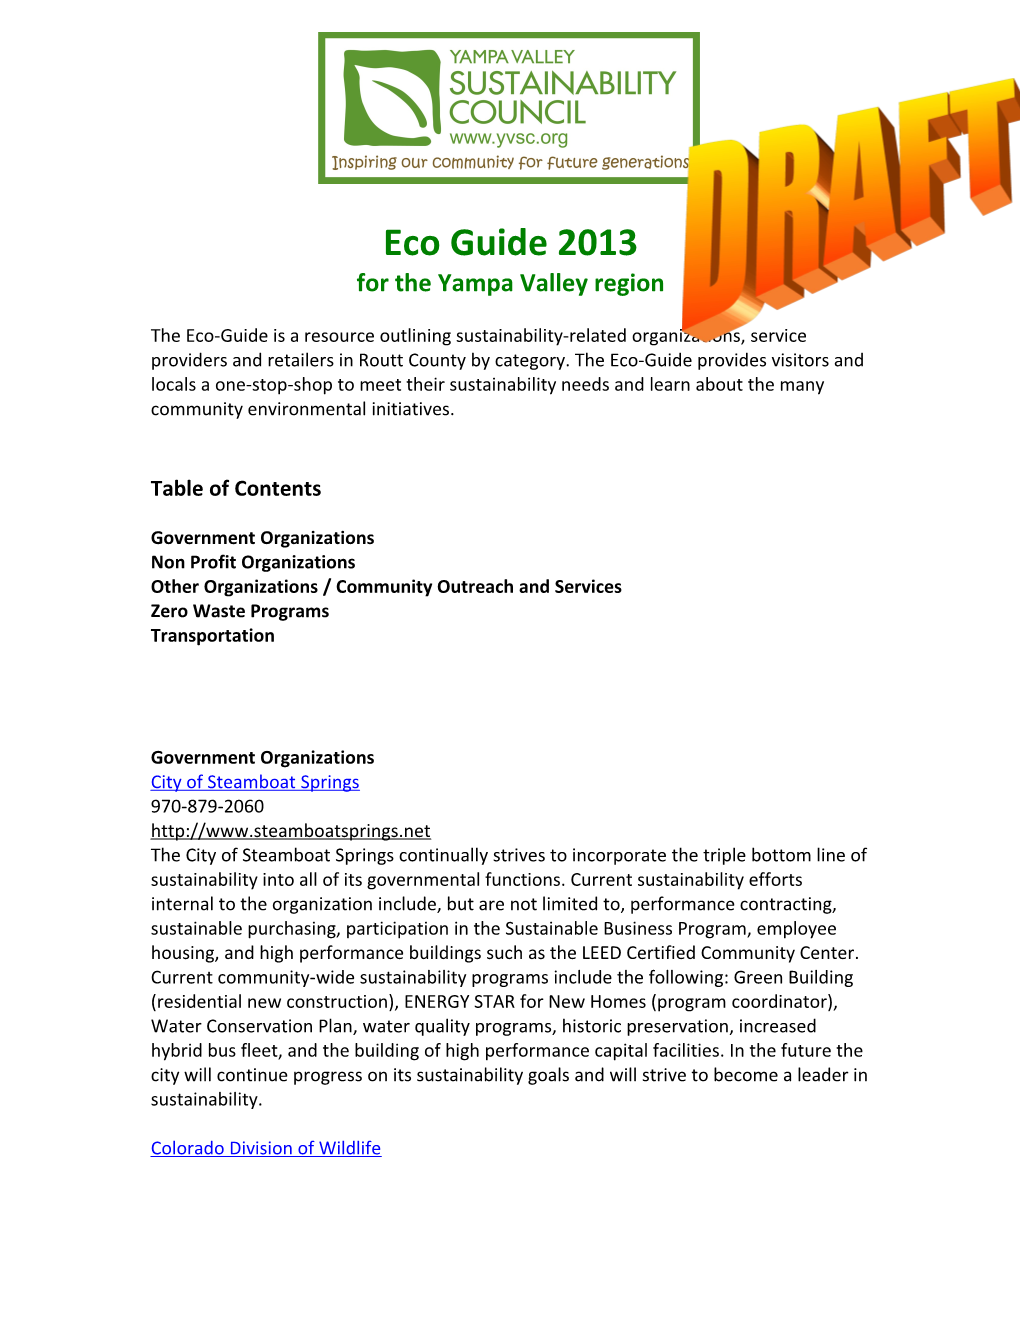 Eco Guide 2013 for the Yampavalley Region